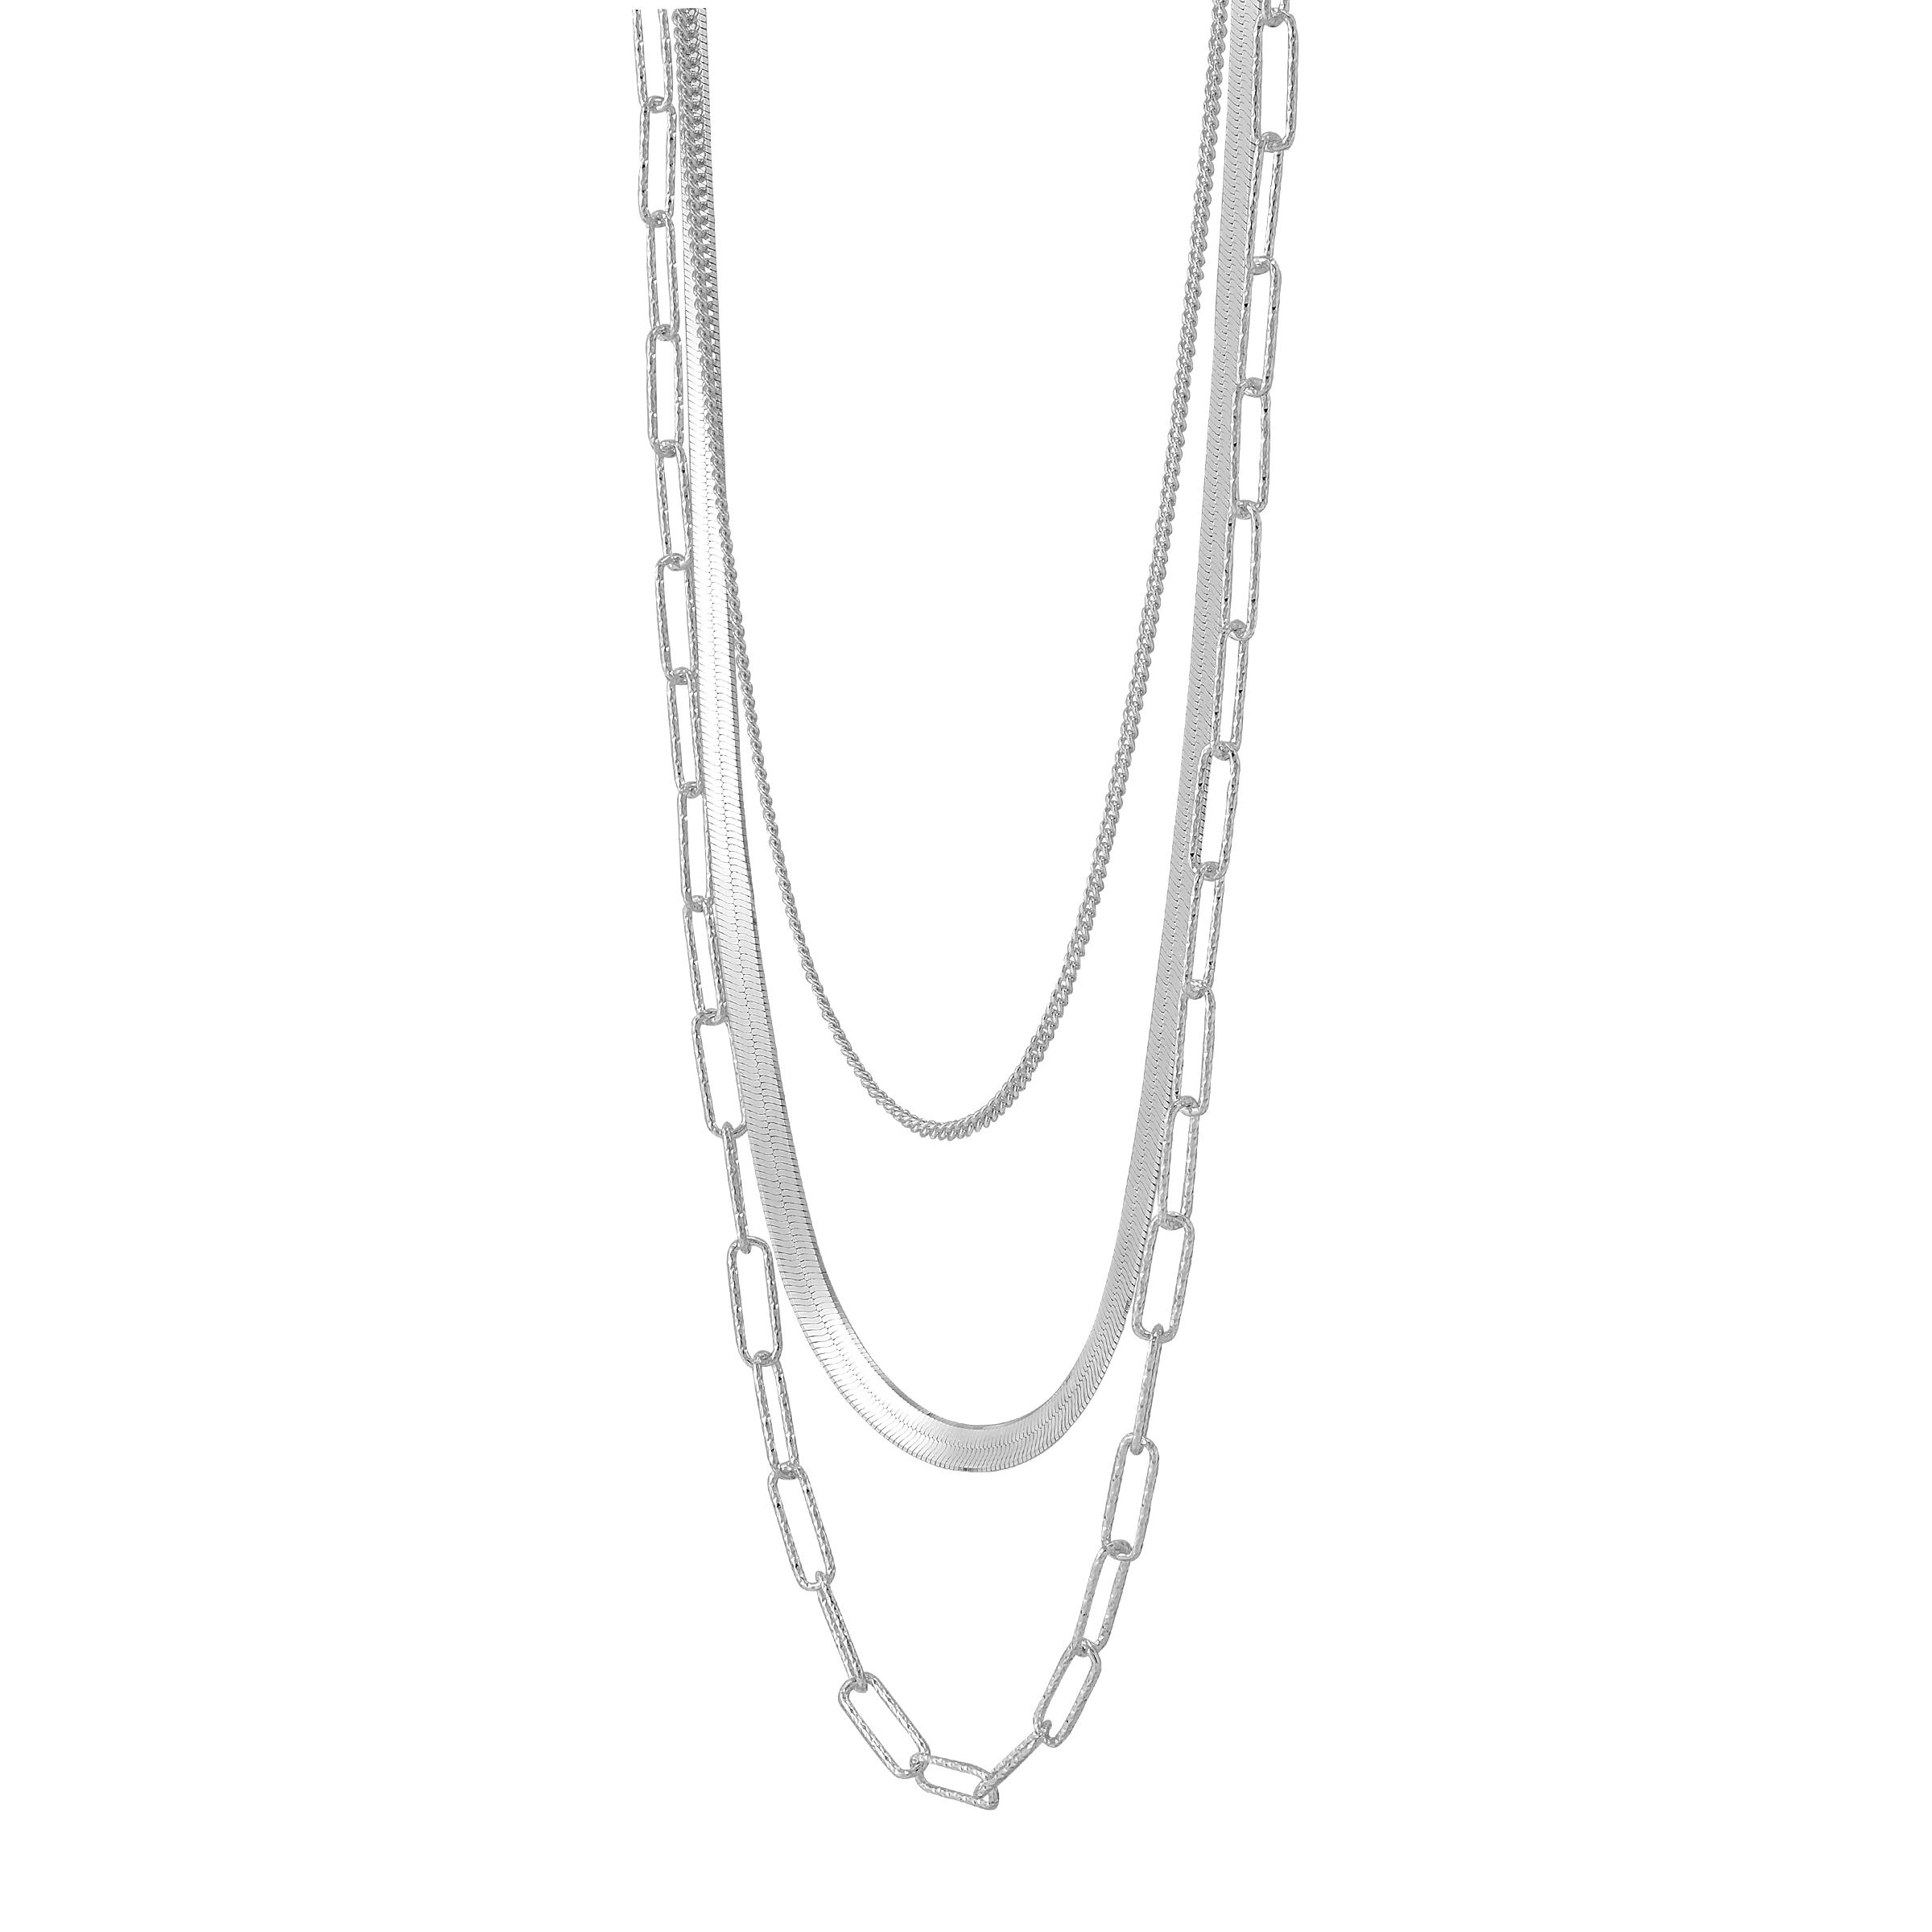 Silpada 'Power of Three' Sterling Silver Necklace, 18